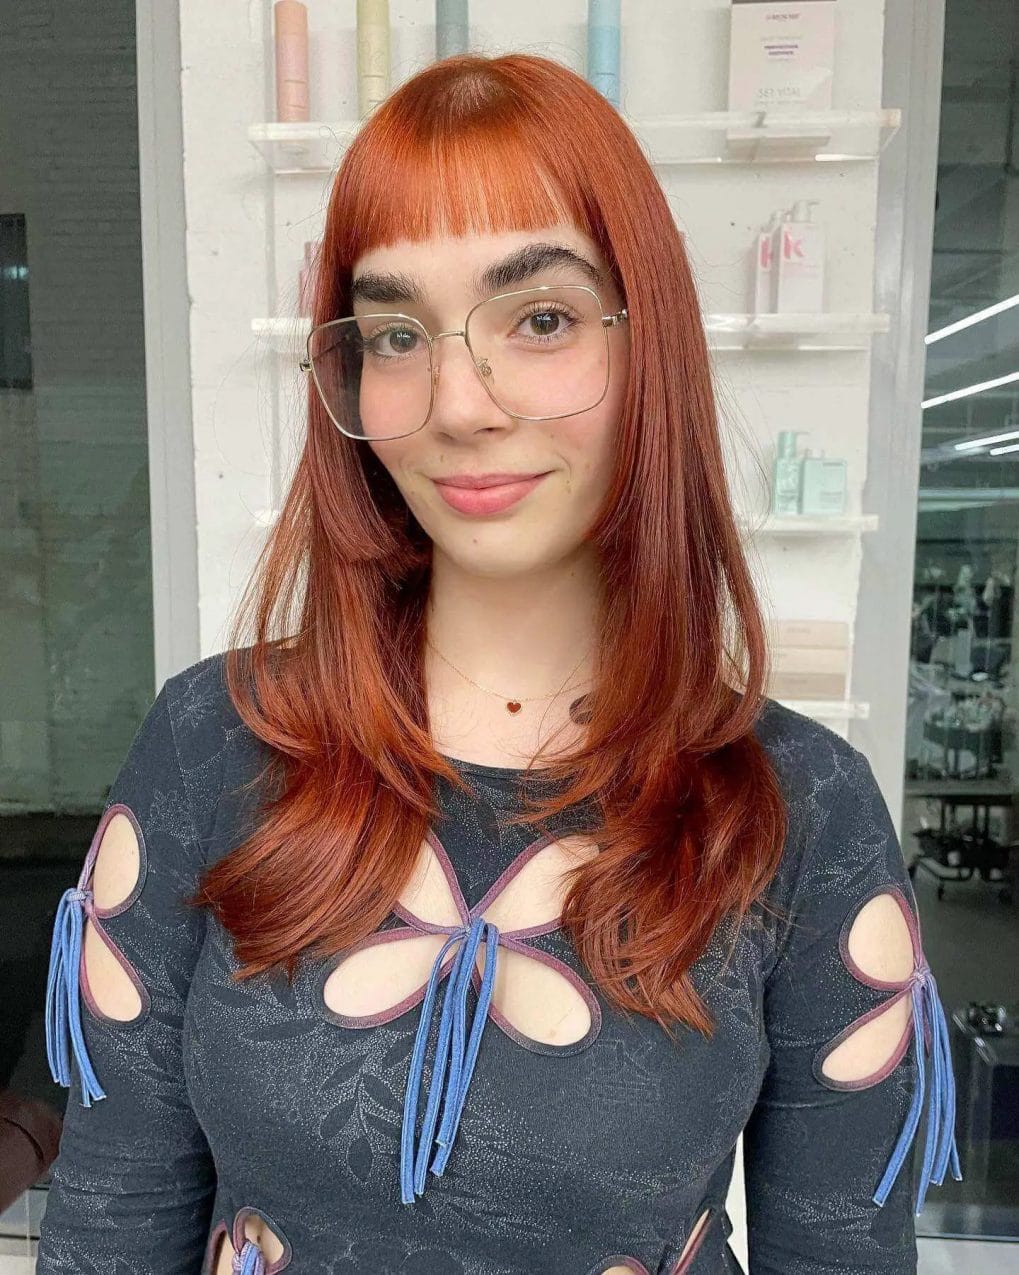 Mid-length fiery copper curls with blunt fringe and minimalist glasses.